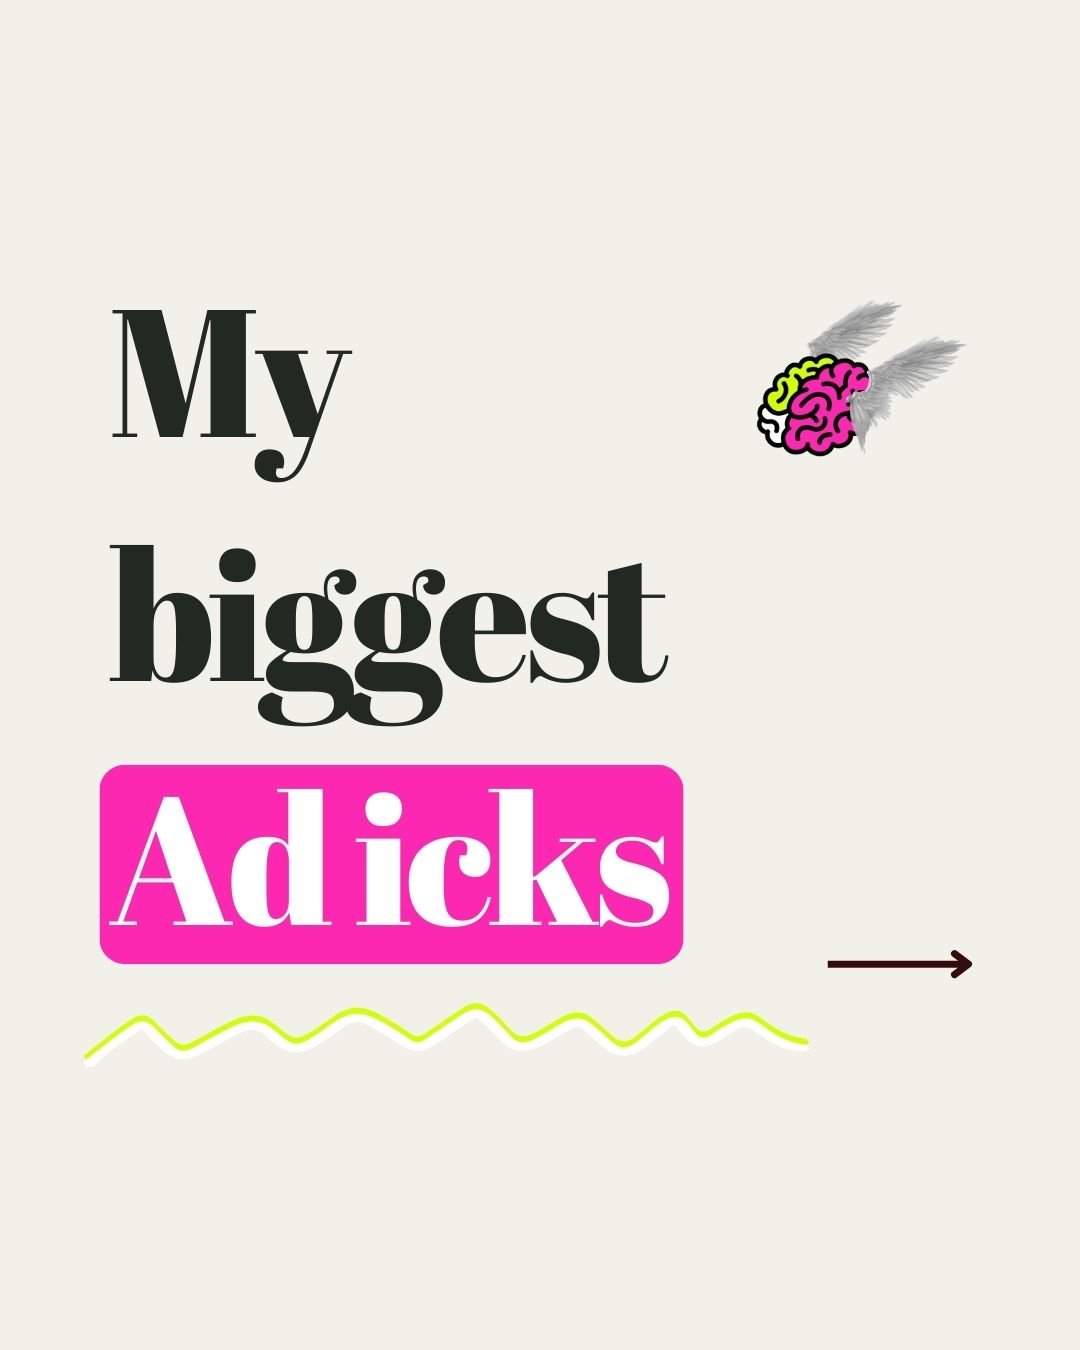 Occupational hazard of an Ads Manager - having an actual list of Ad icks that make my fingers curl and my eyes wince. 🙈

A lot of these icks are rooted in using outdated tactics. 

Things that worked maybe 4 years ago but I haven't seen work since. 